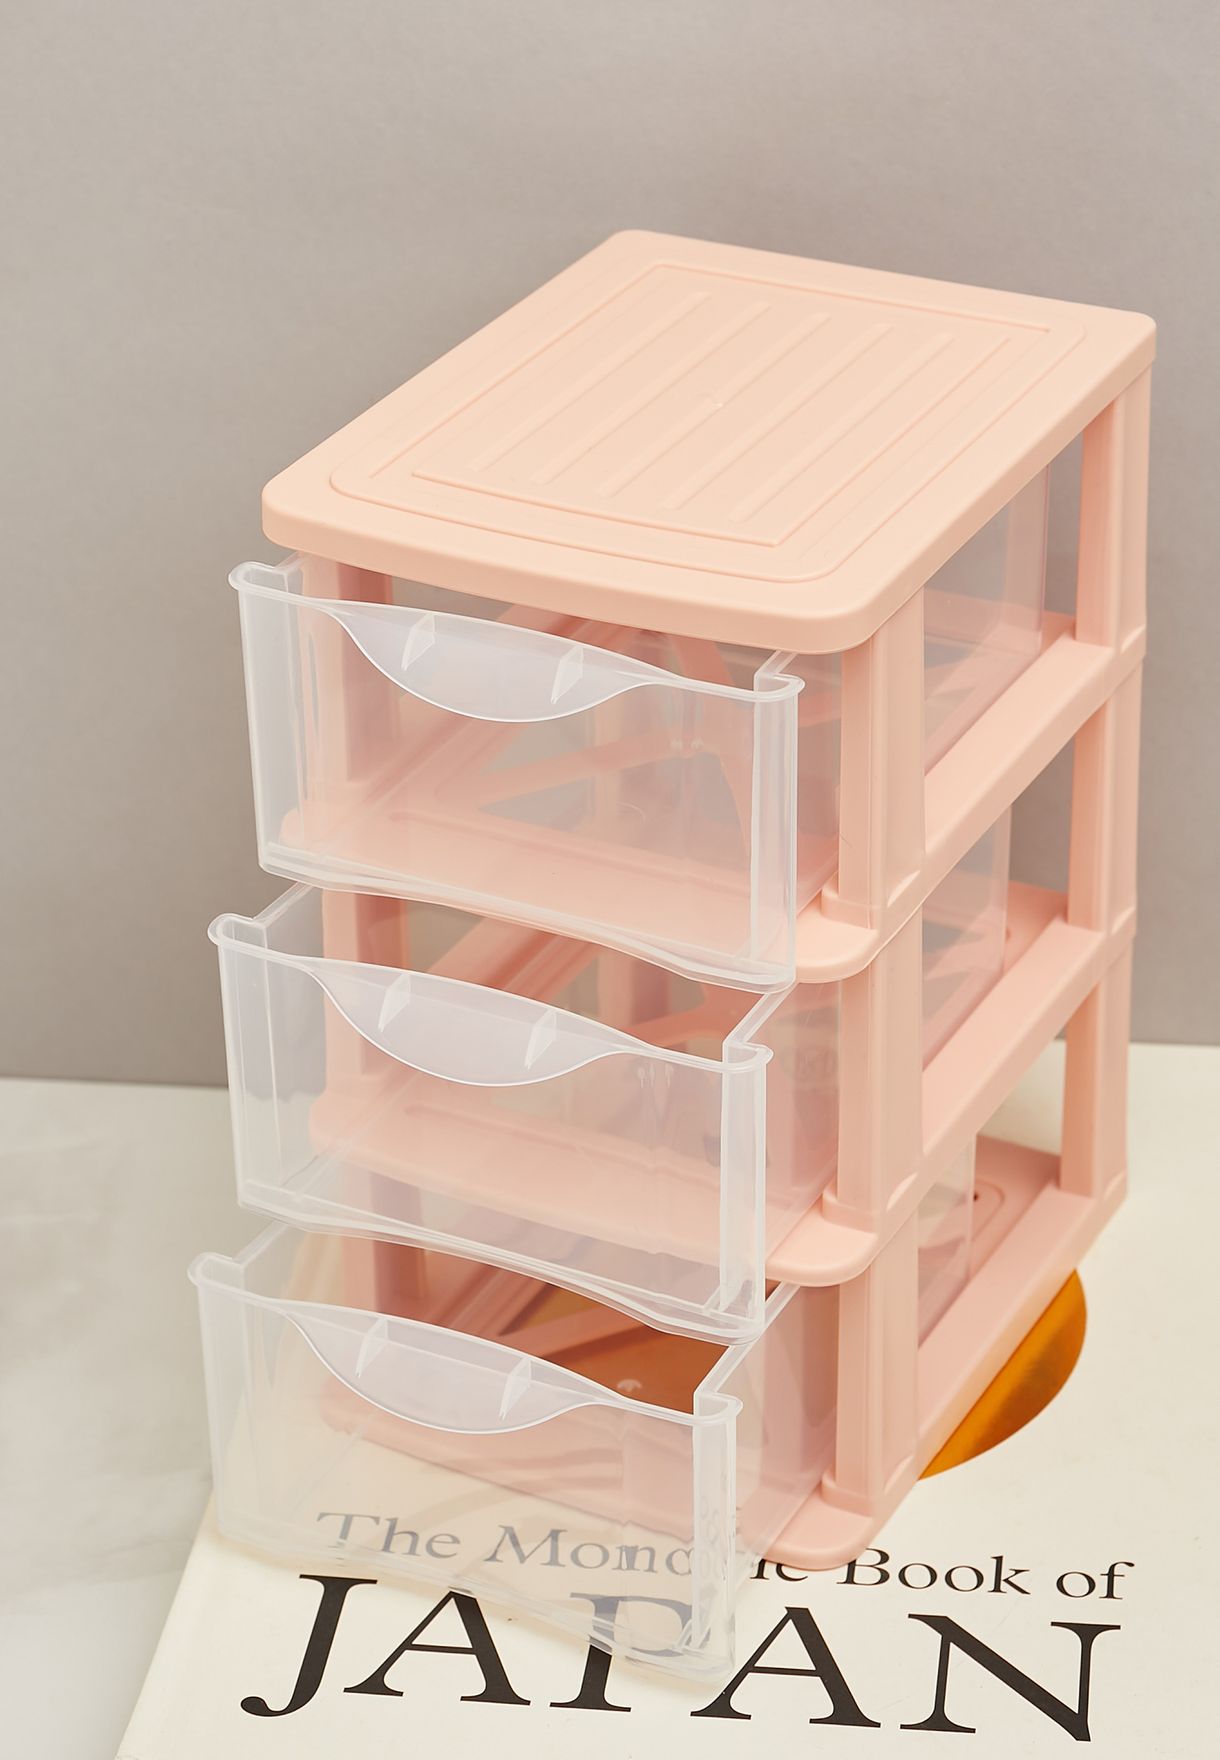 Pink Stationery Storage Holder With Drawers